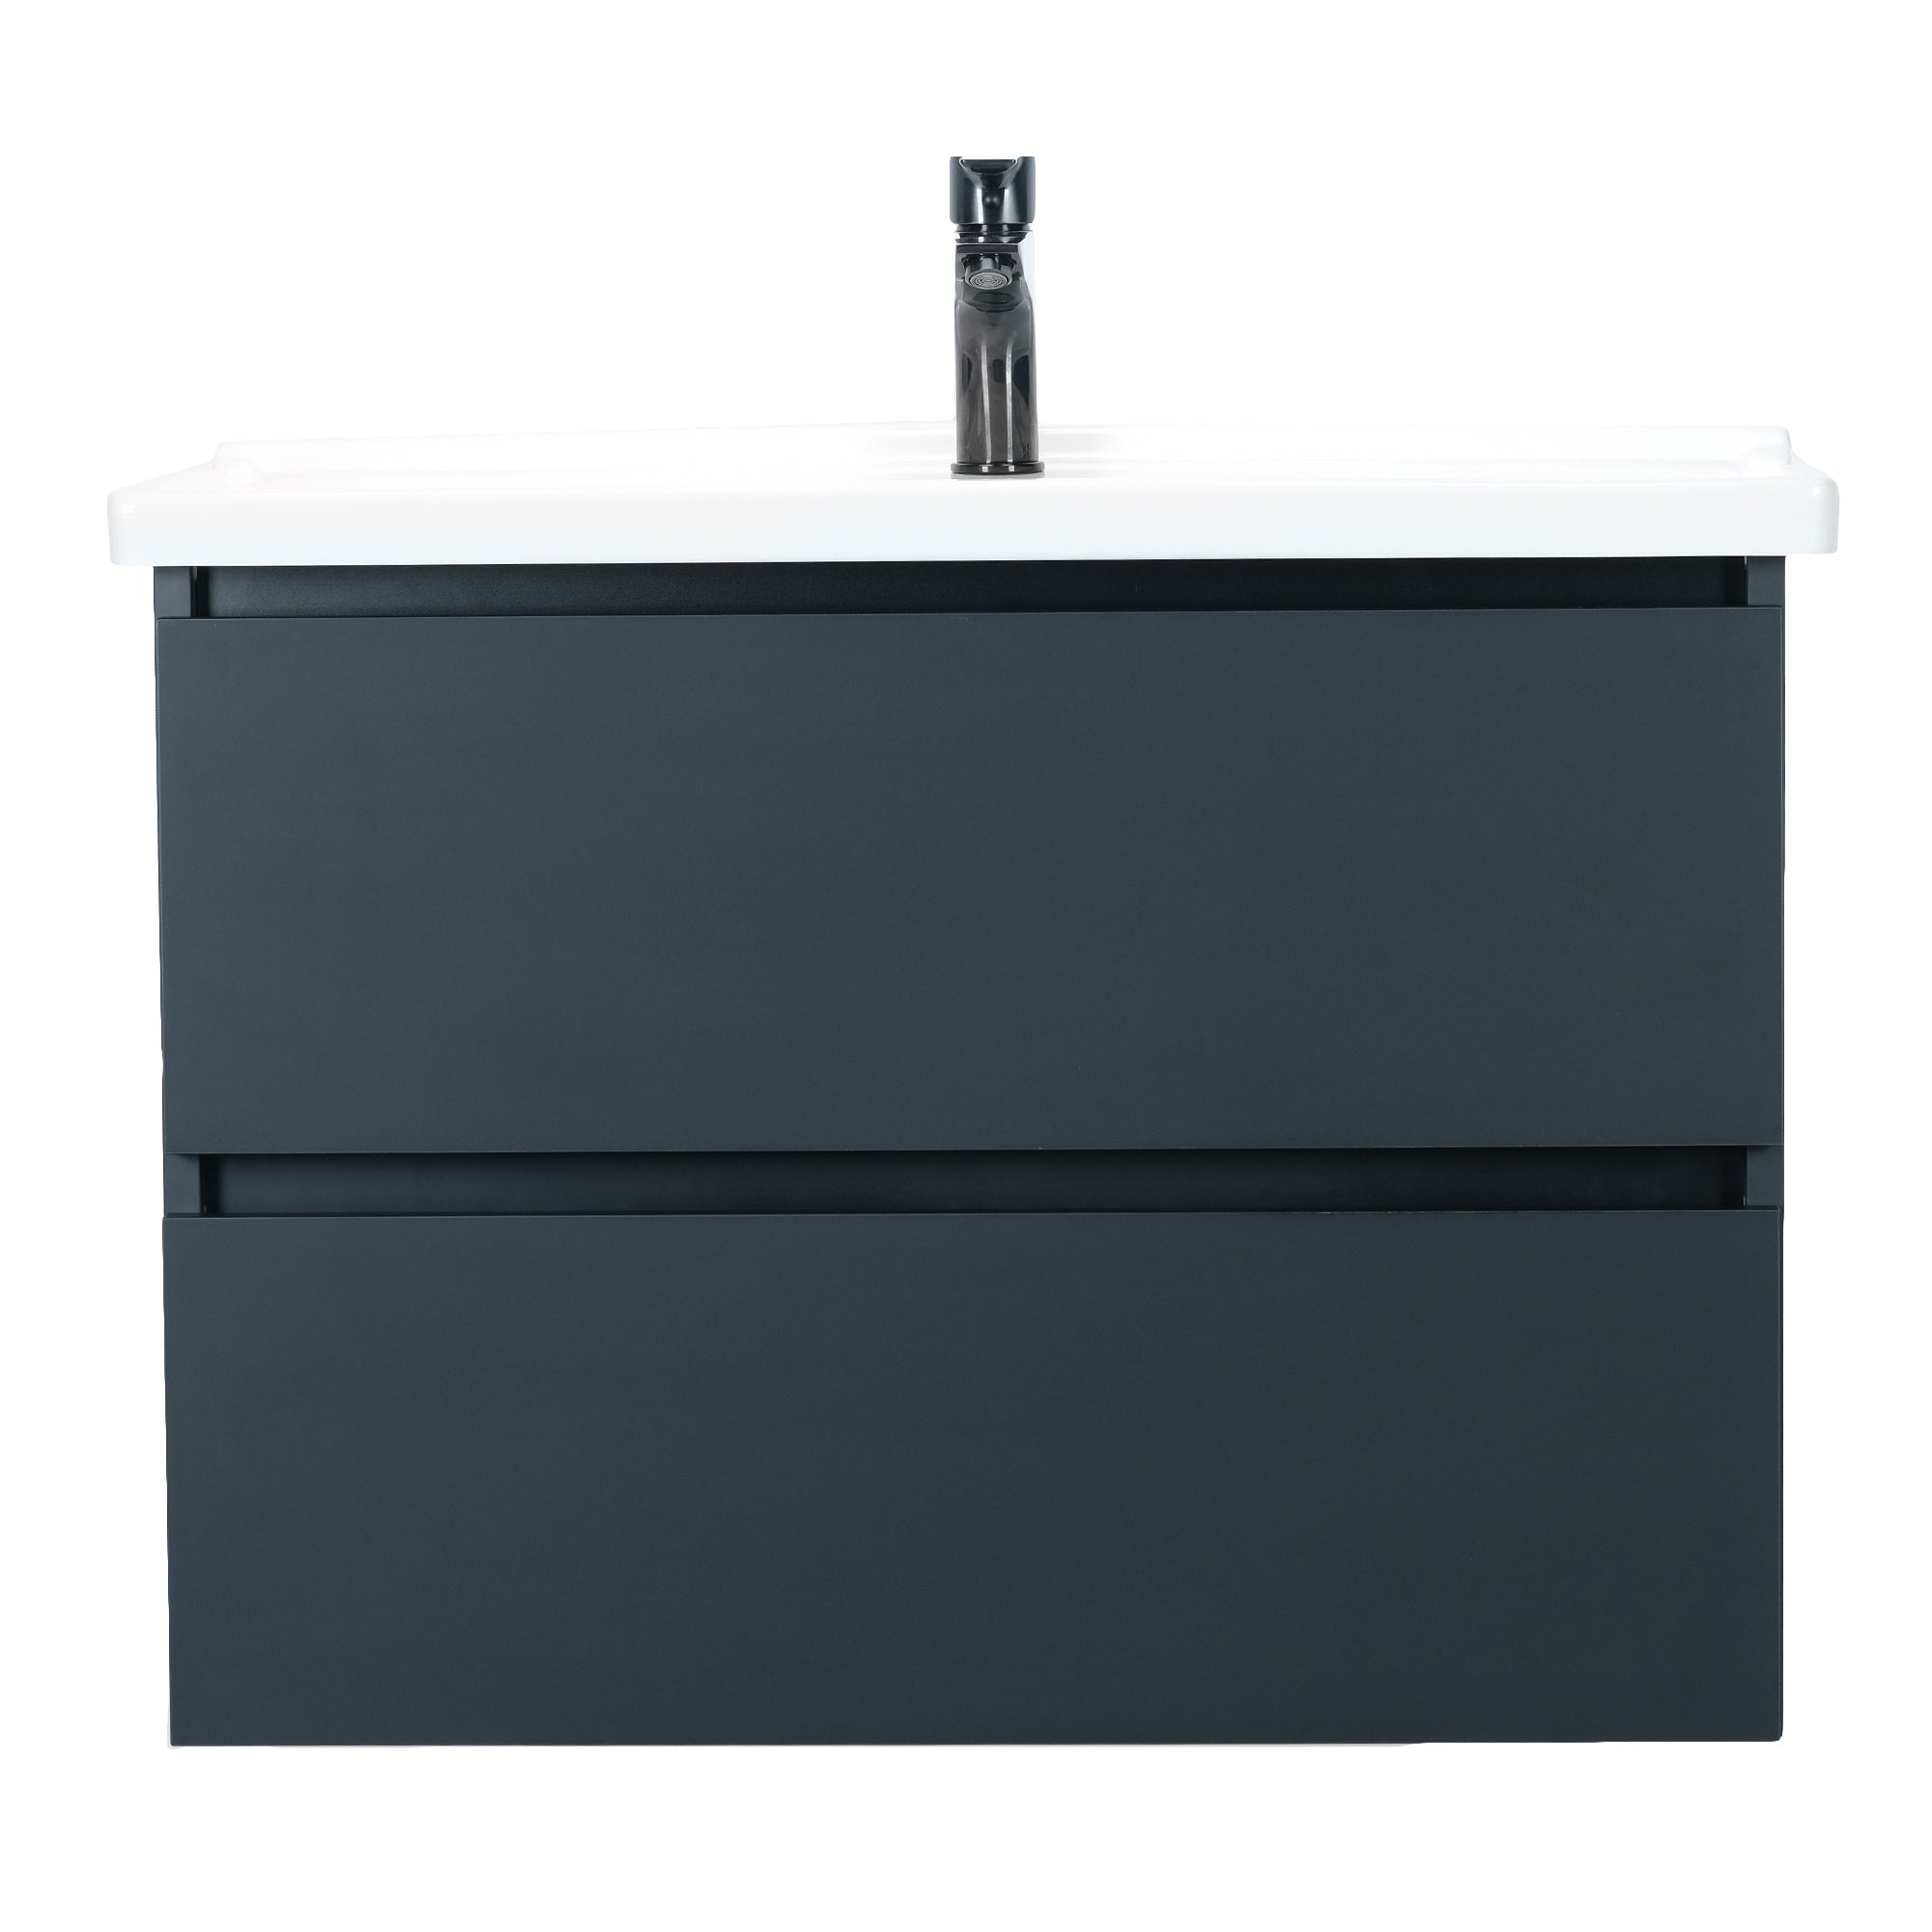 BRASIL 32 INCH MODERN WALL MOUNT VANITY AND SINK COMBO - CHARCOAL GRAY